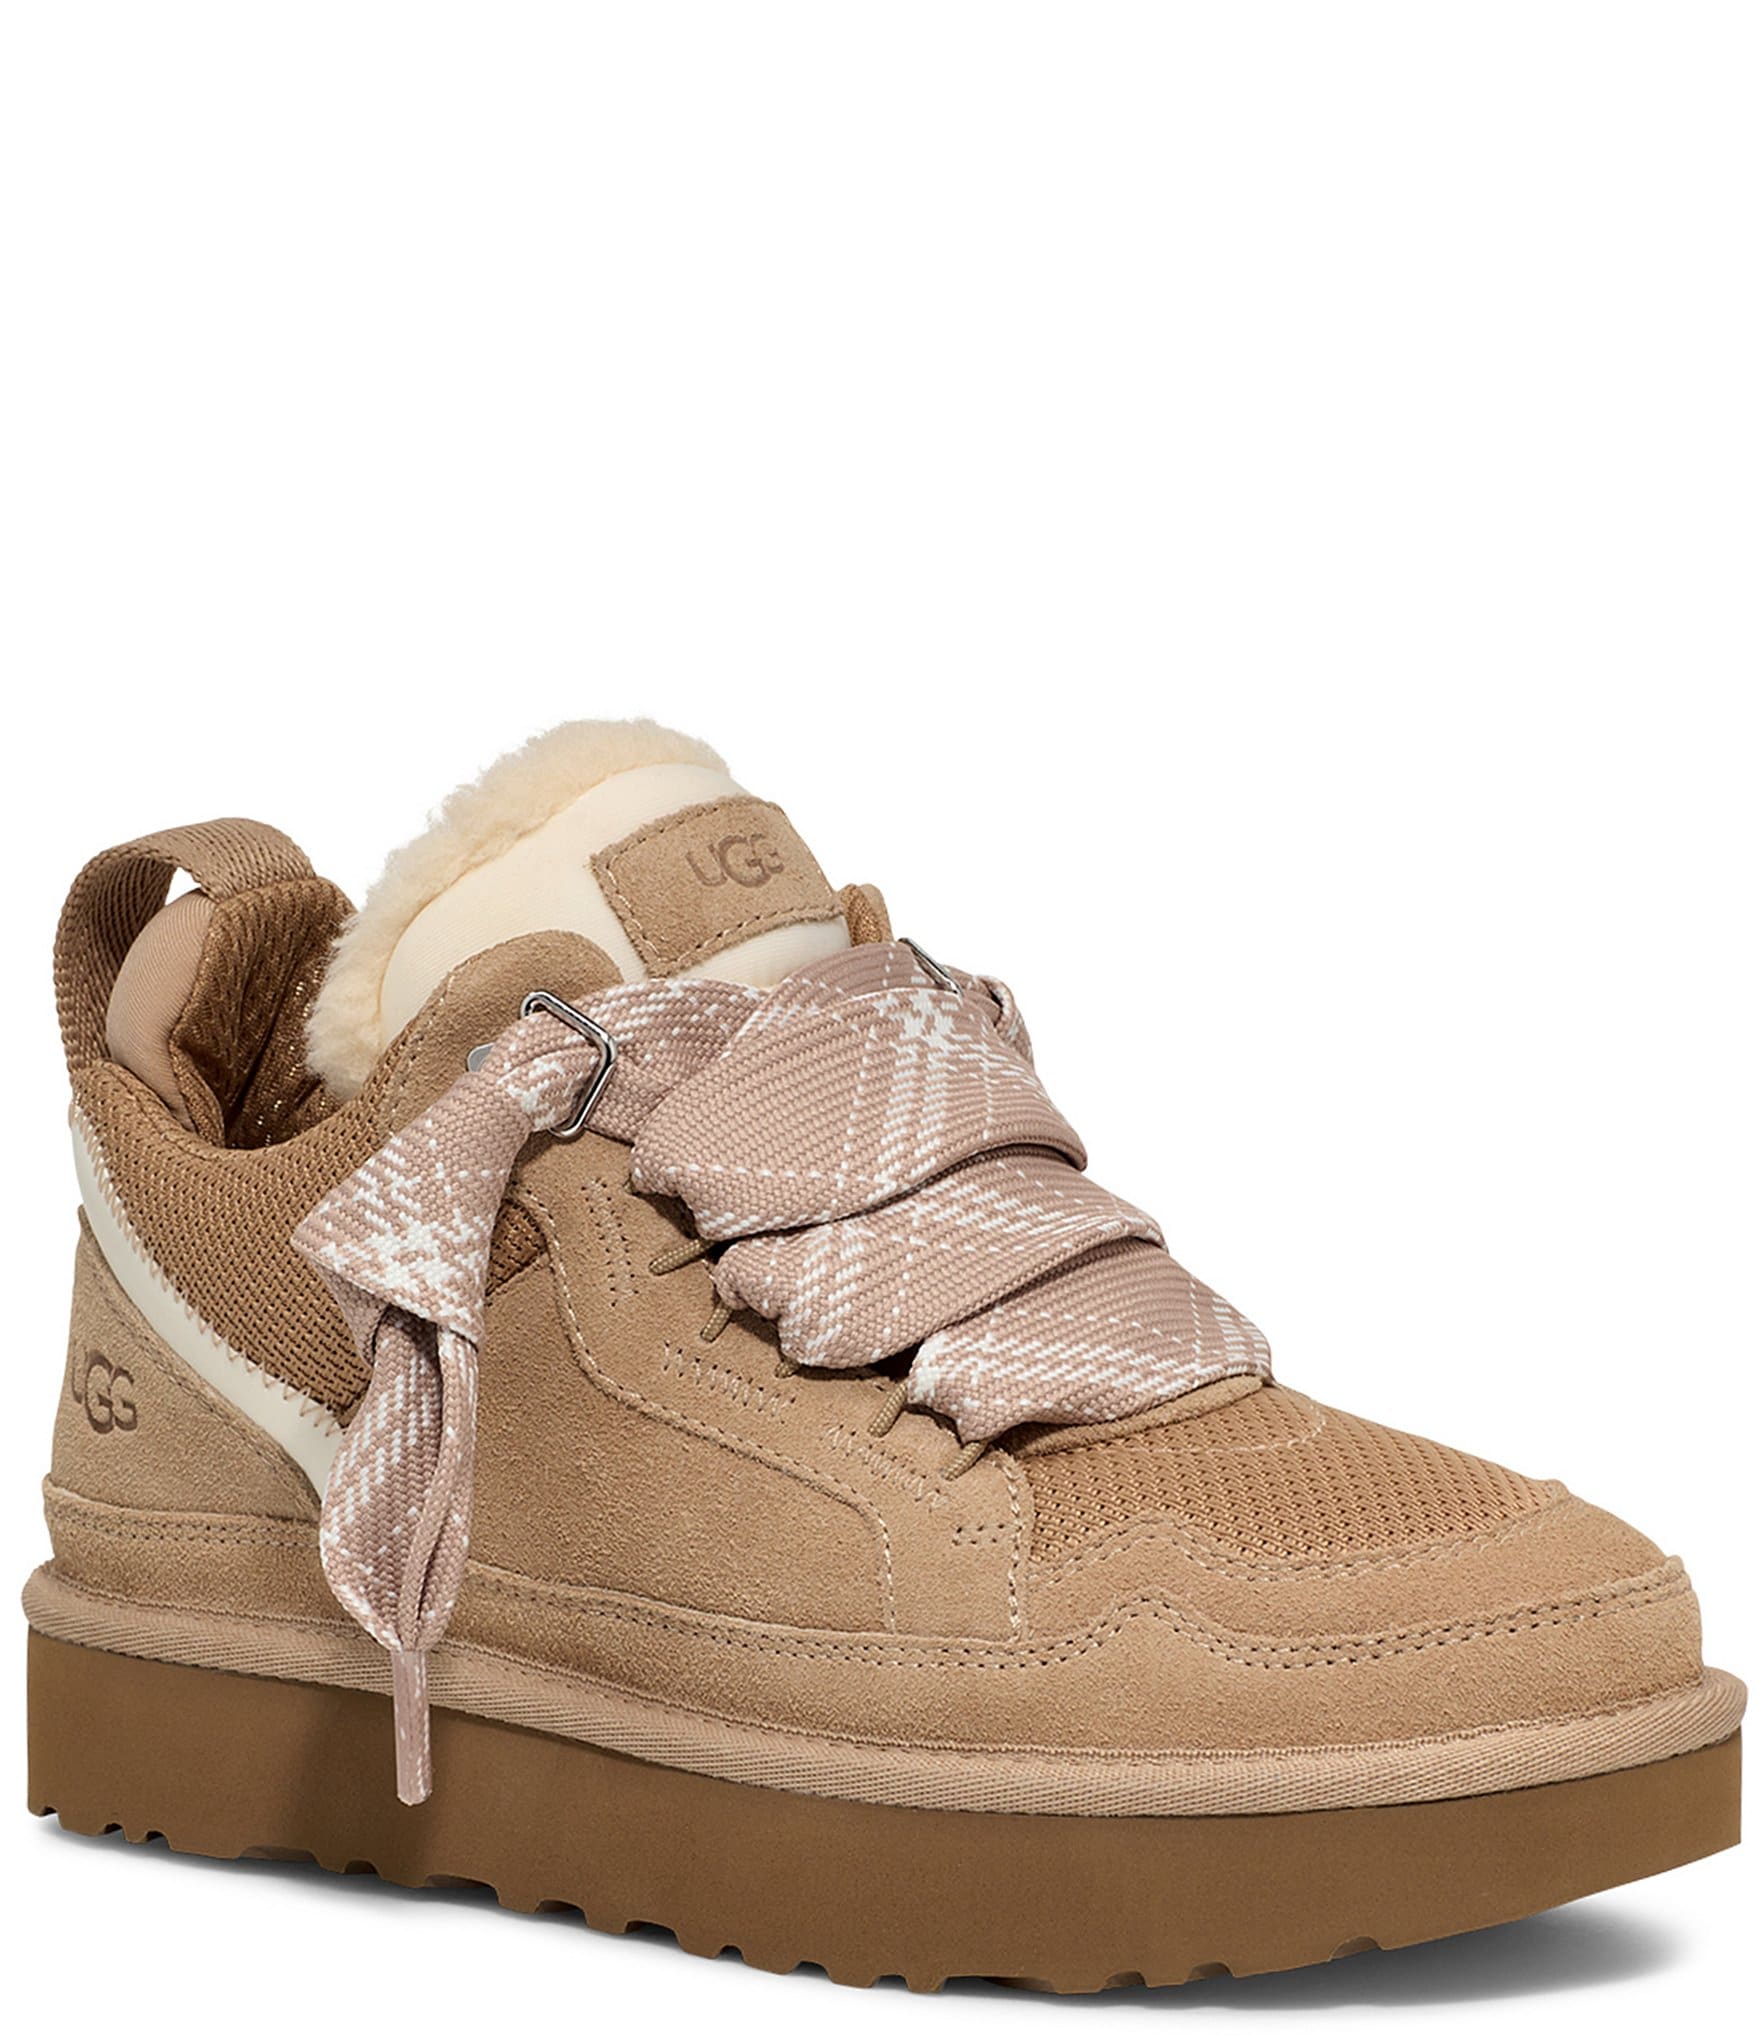 Discover more than 190 ugg fur lined sneakers super hot